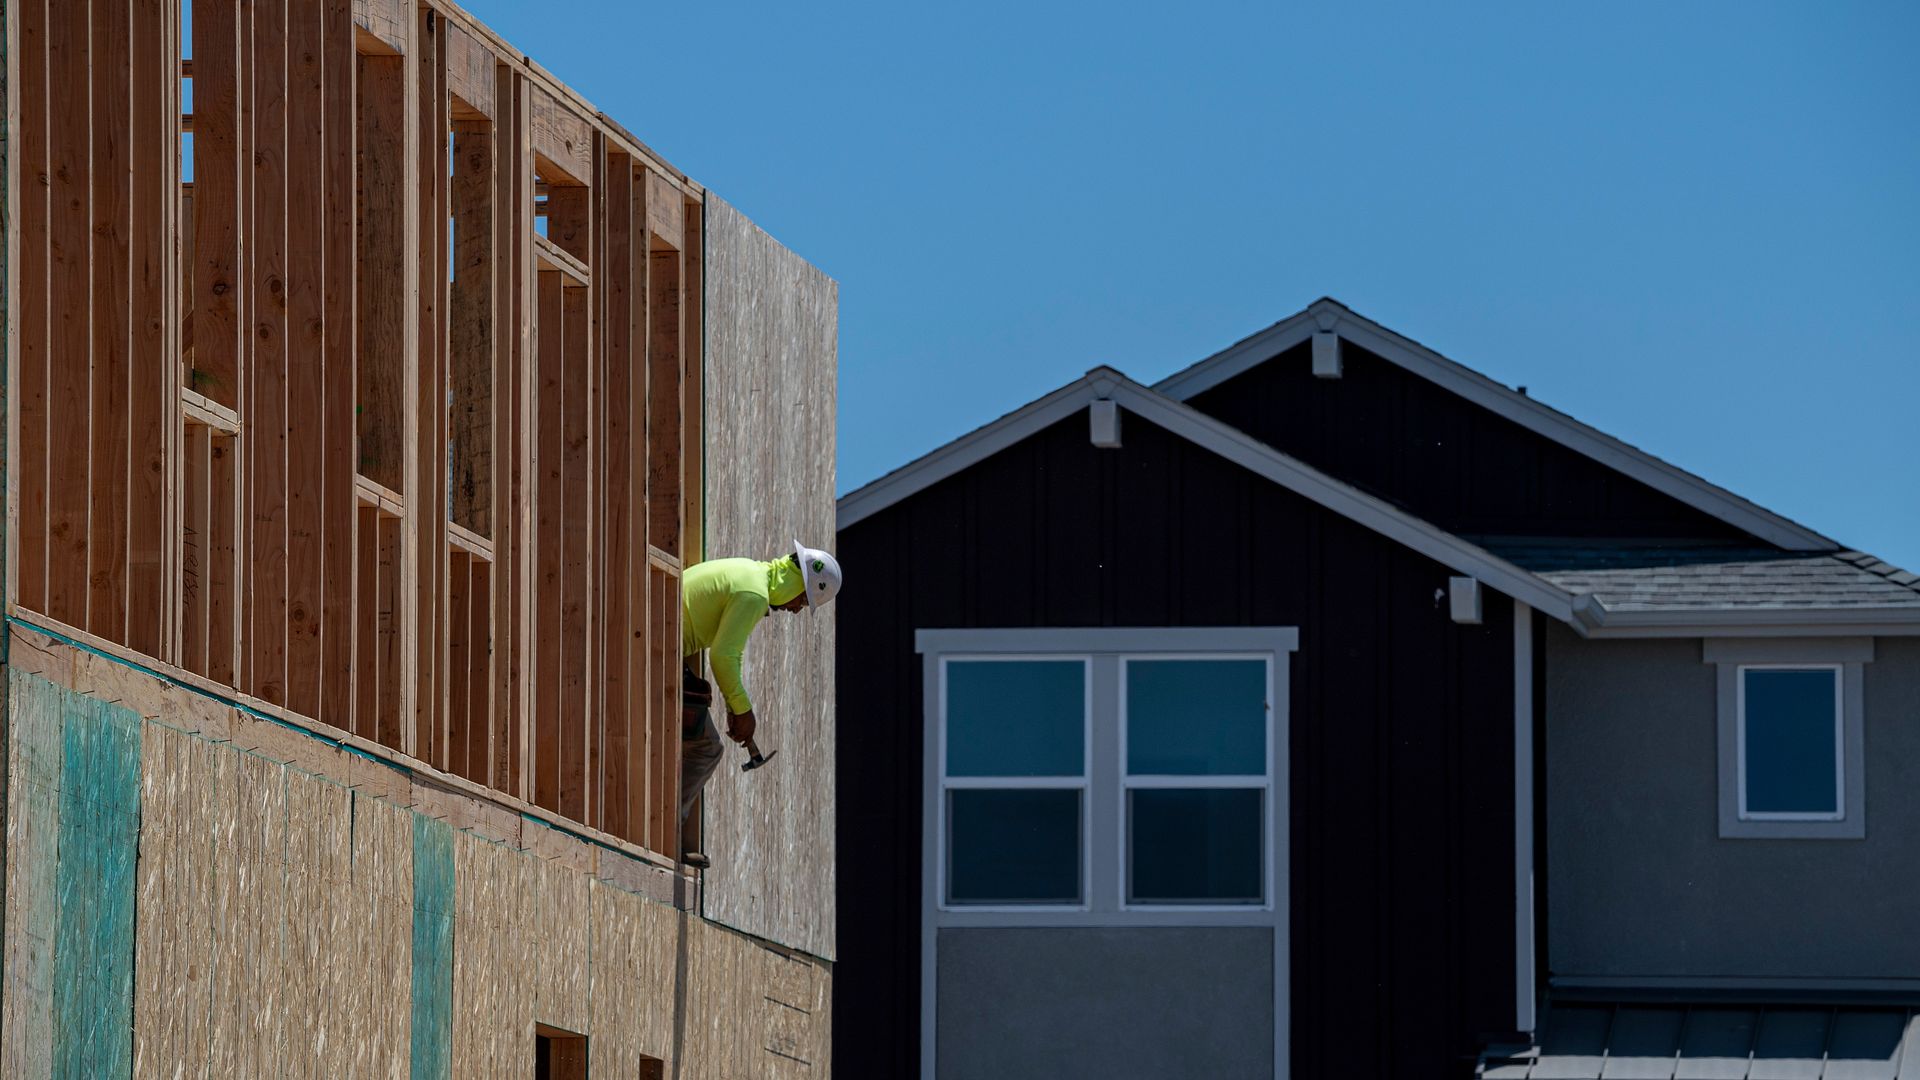 A construction worker helps install framing on a house